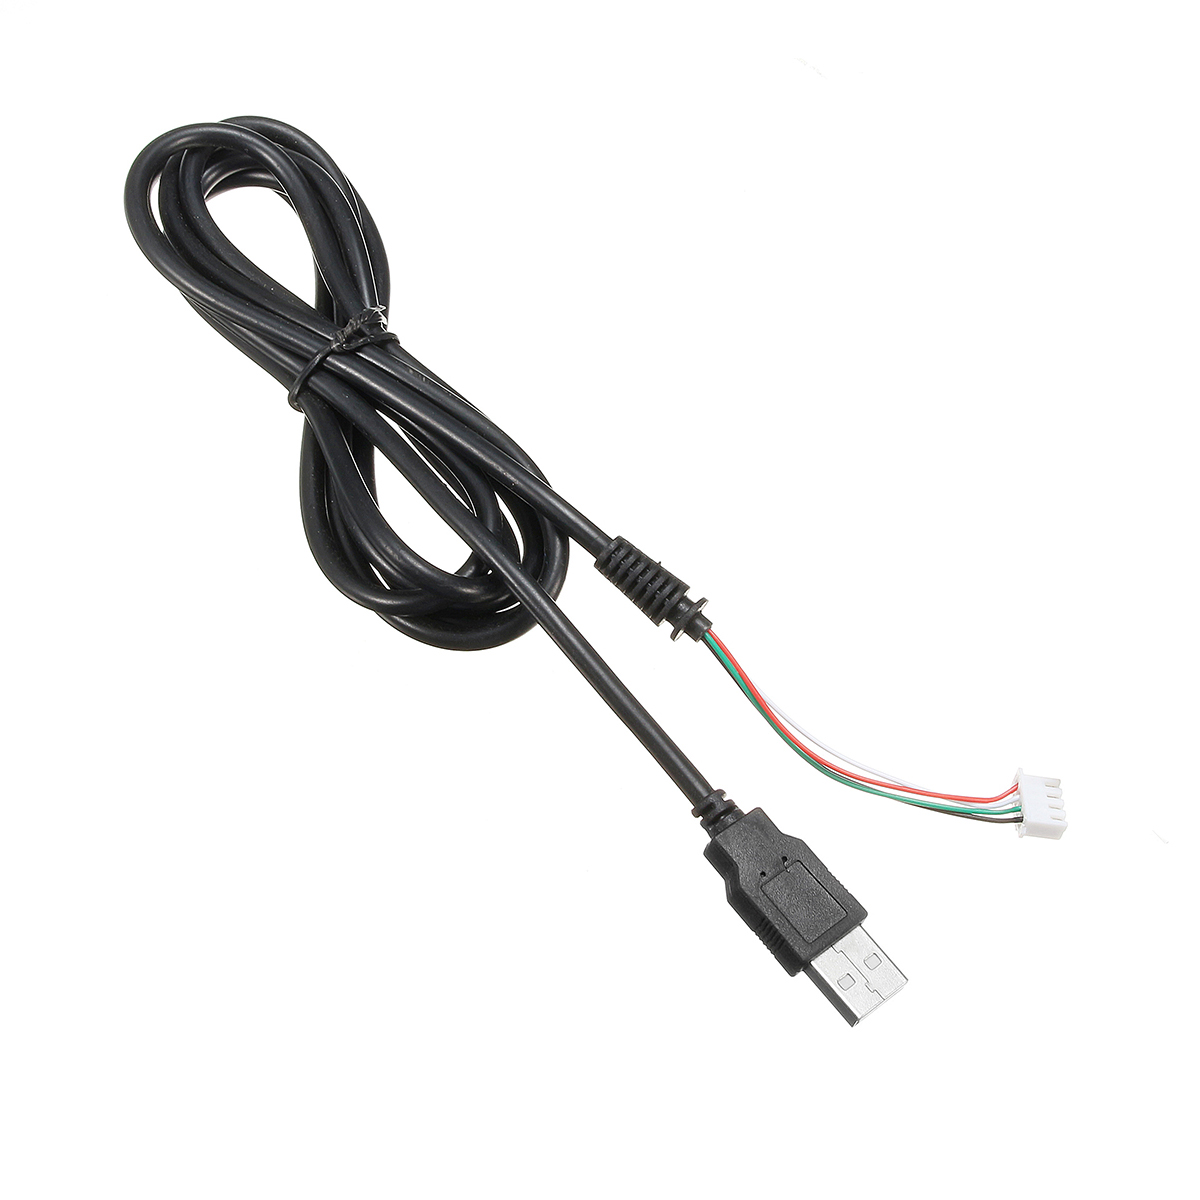 

USB Connection Cable for Arcade Game Joystick Controller